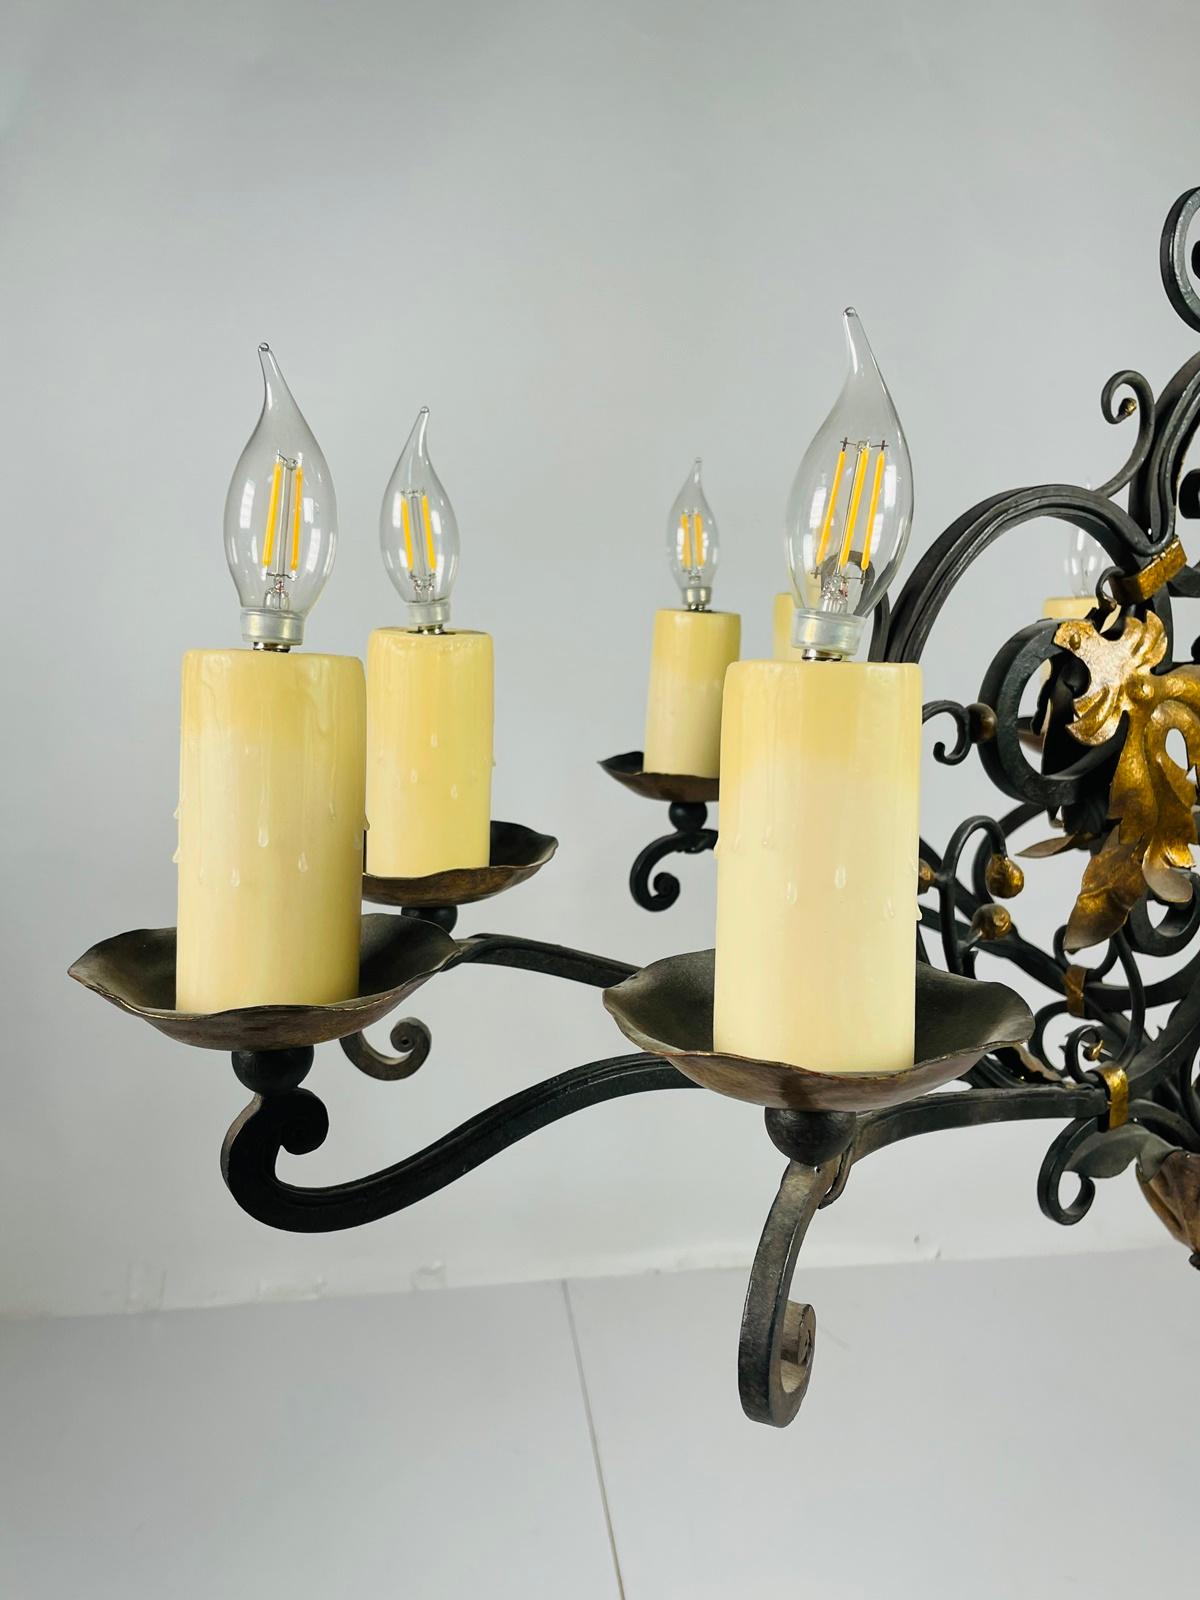 Wrought Iron & Gold Gilt Chandelier by Paul Ferrante, USA 2016 For Sale 2